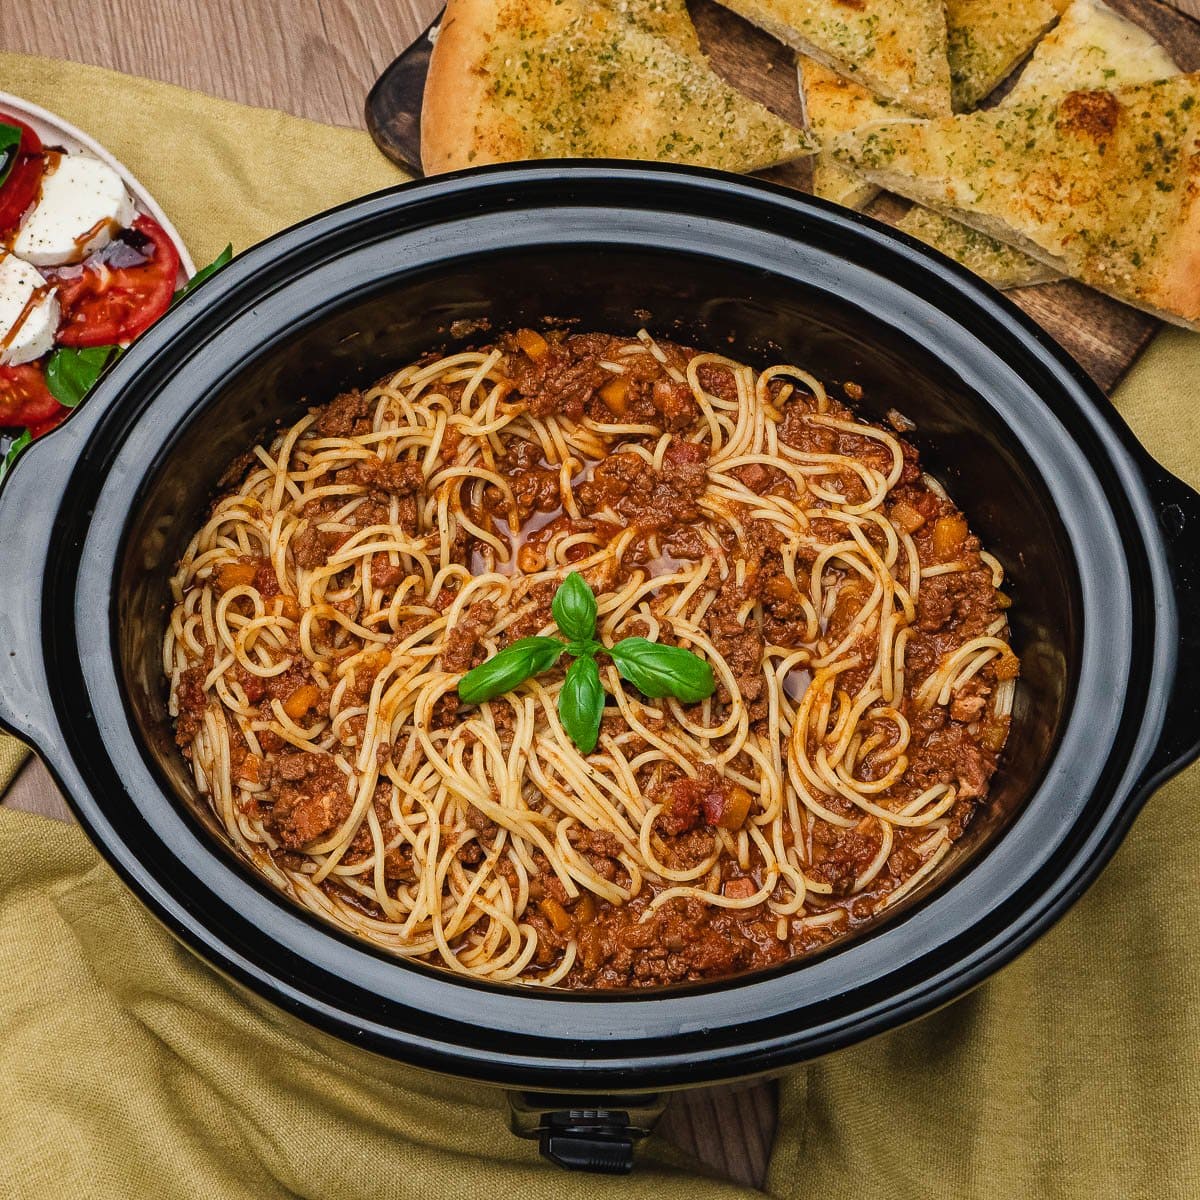 How Do You Make Spaghetti In A Slow Cooker